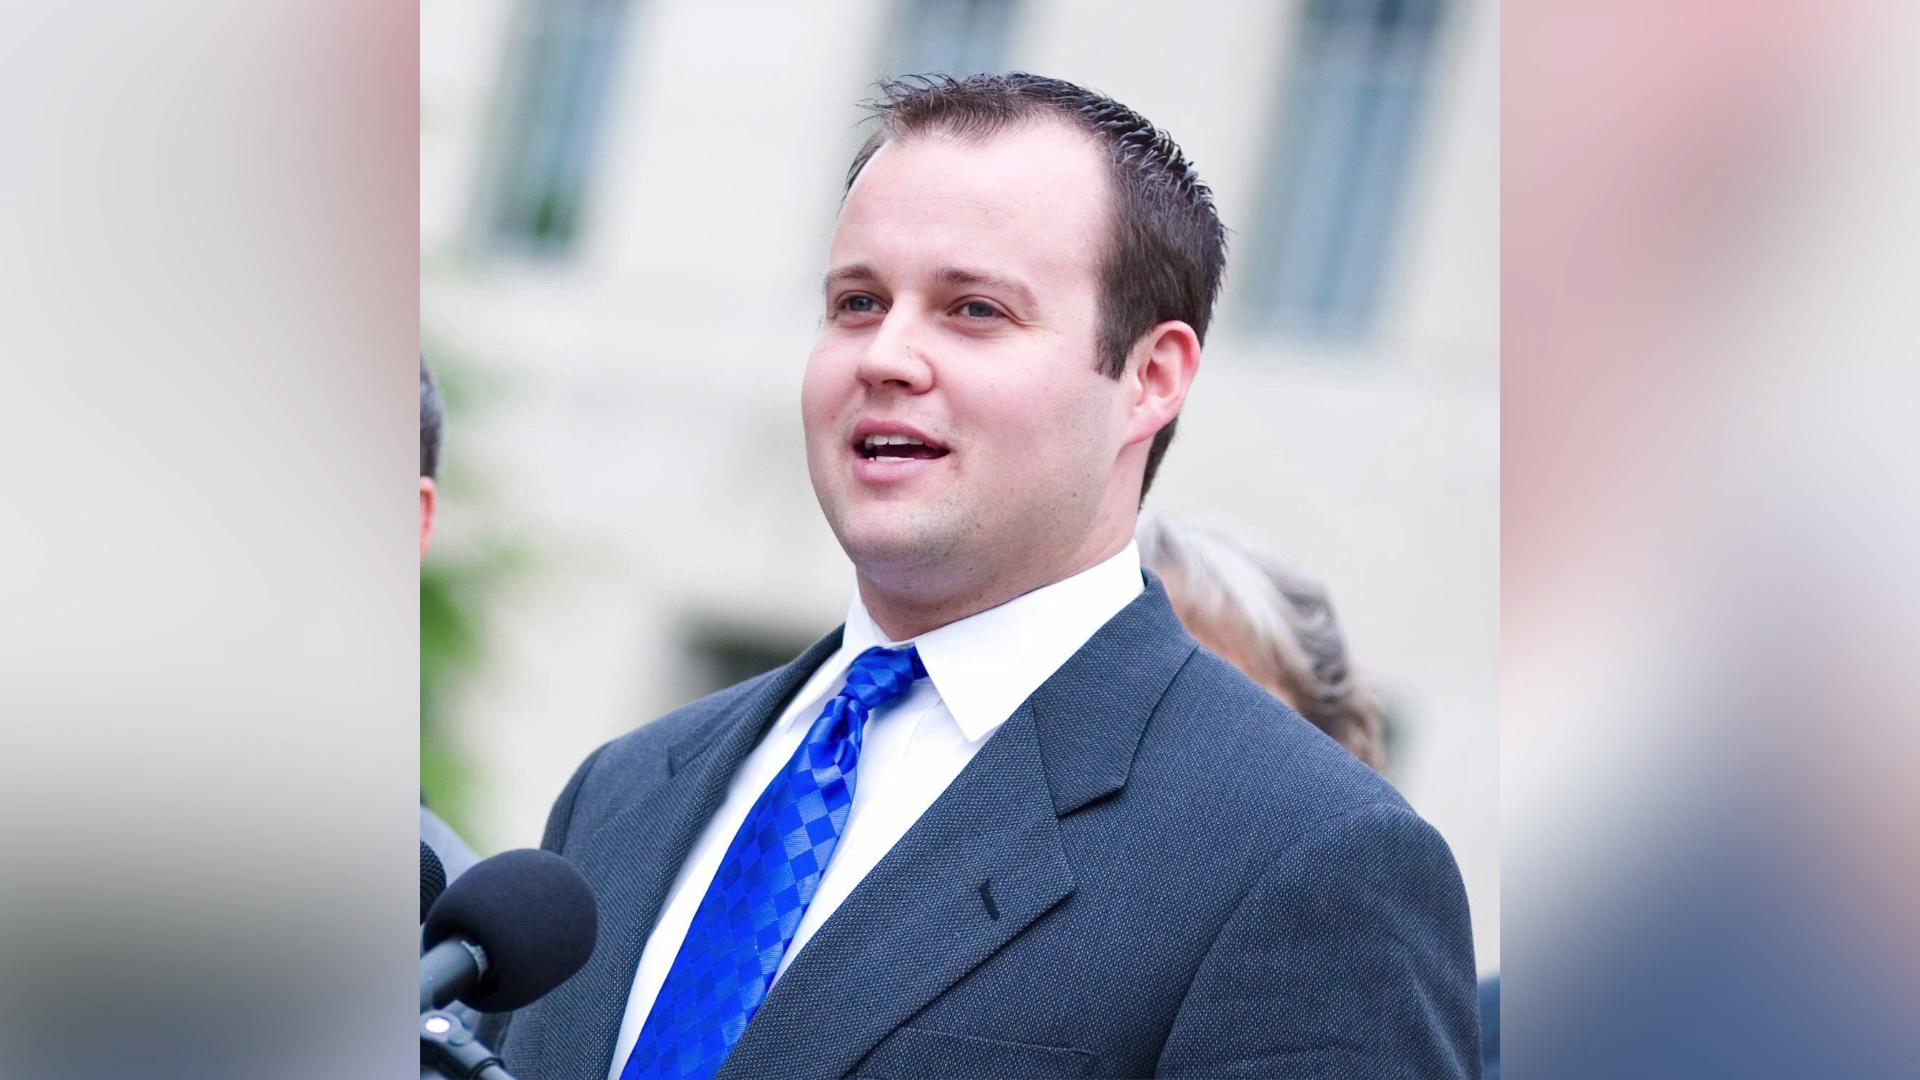 Josh Duggar apologizes after sex abuse allegations surface